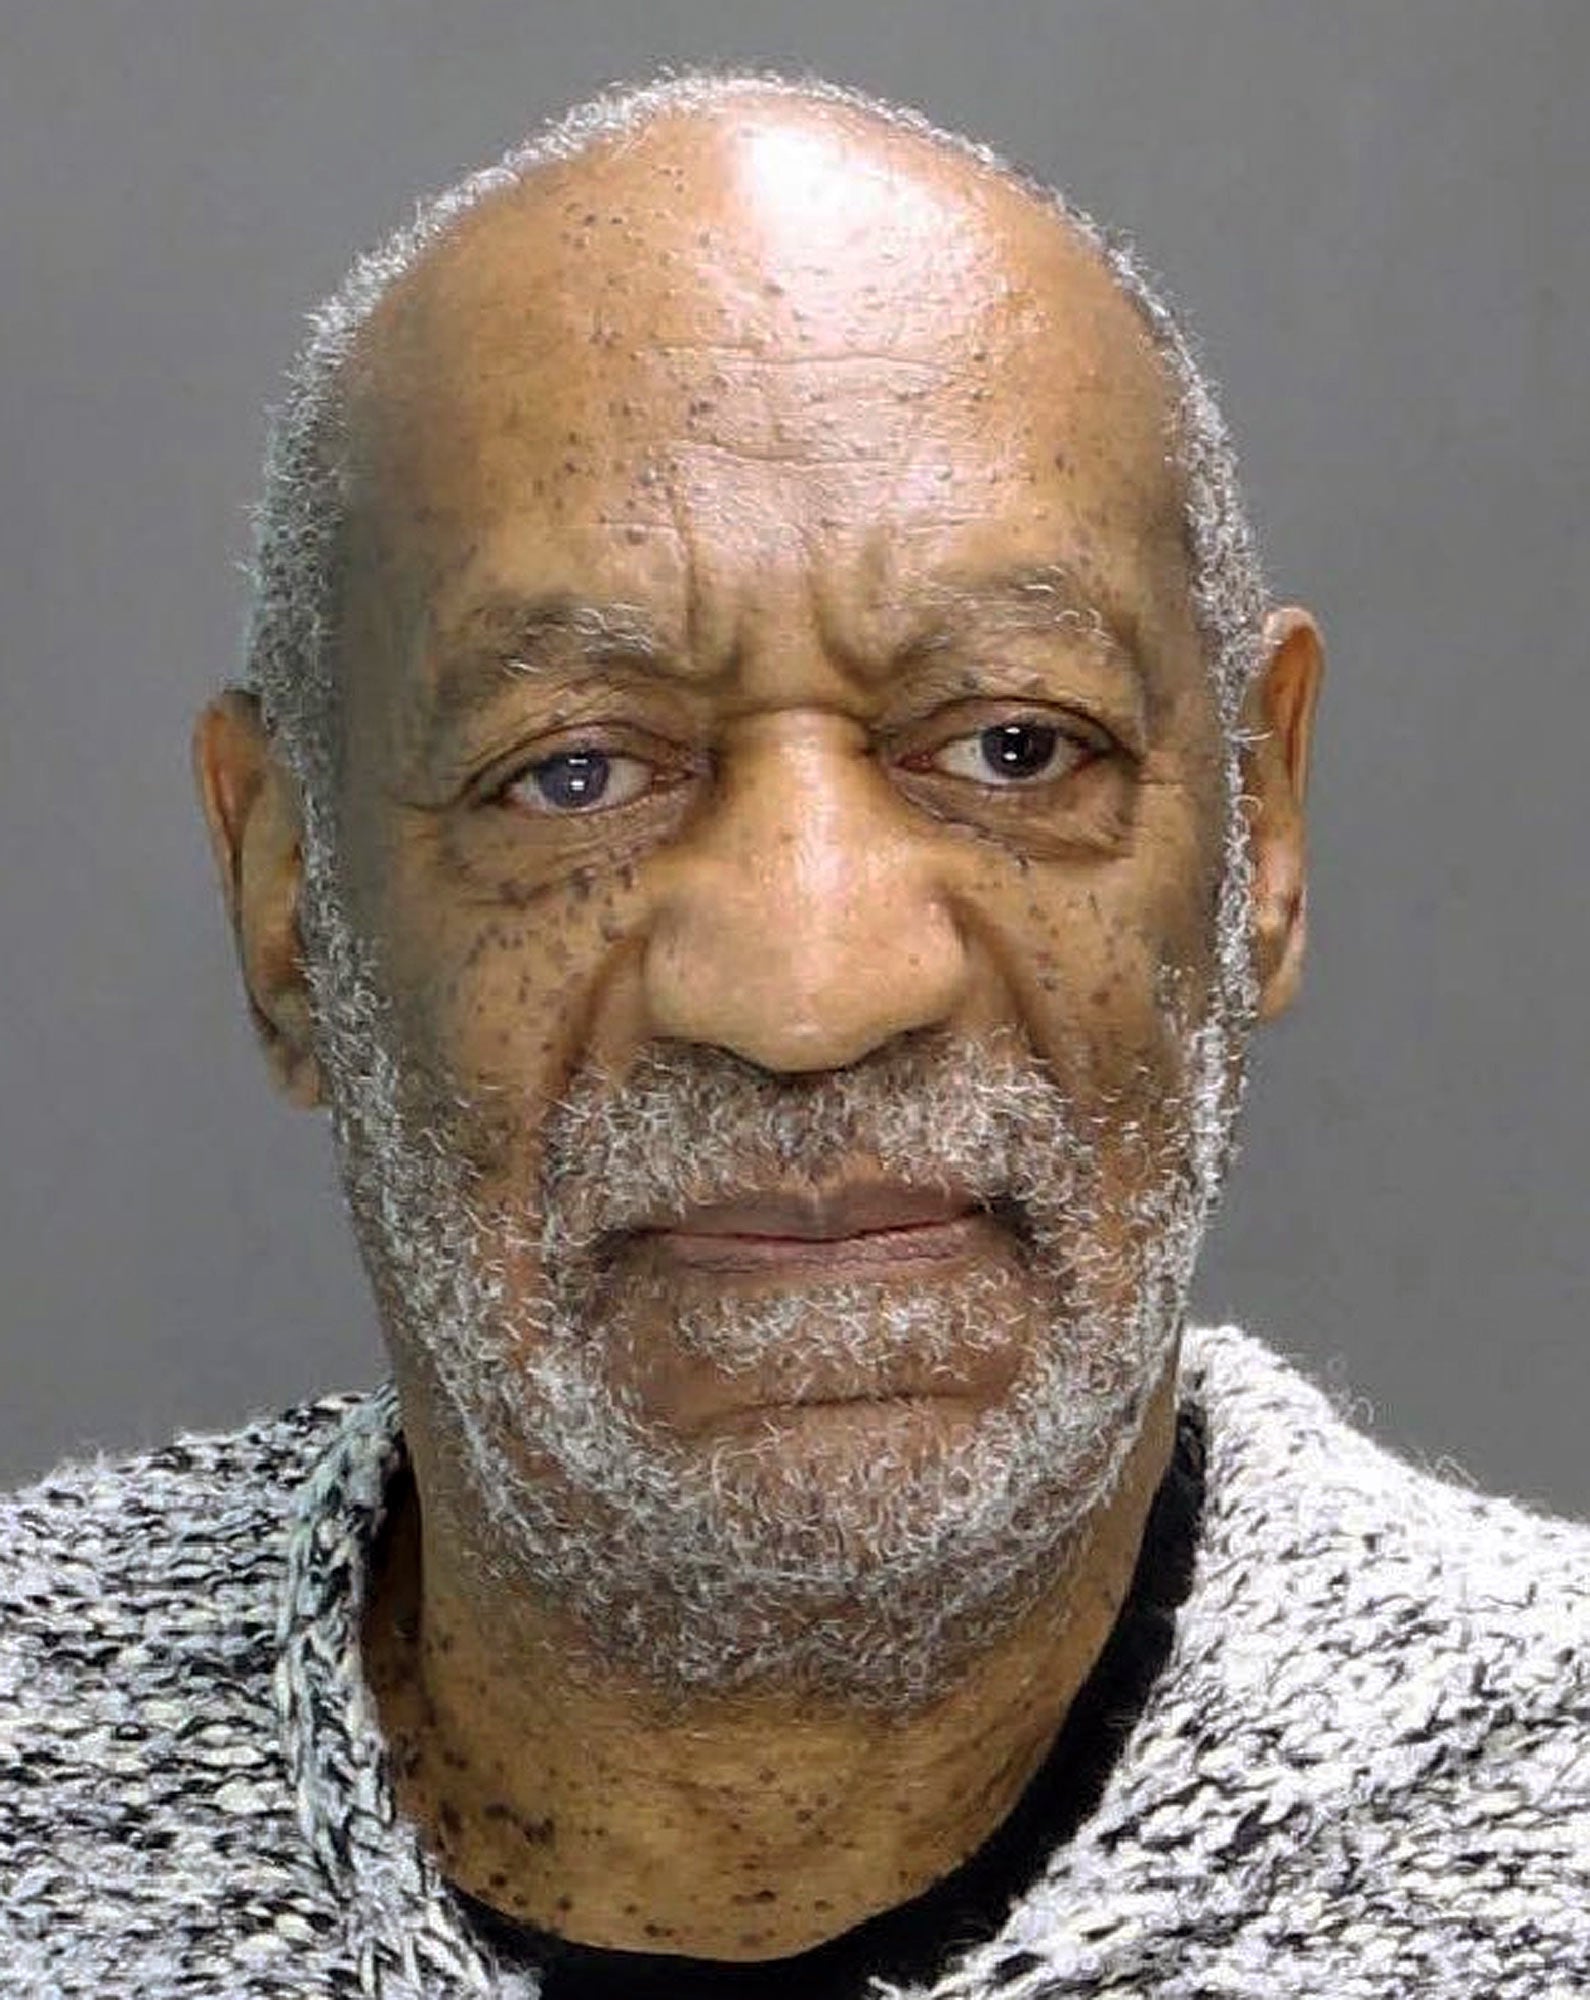 Arrest Warrant Issued for Bill Cosby for Alleged January 2004 Sexual Assault of Andrea Constand